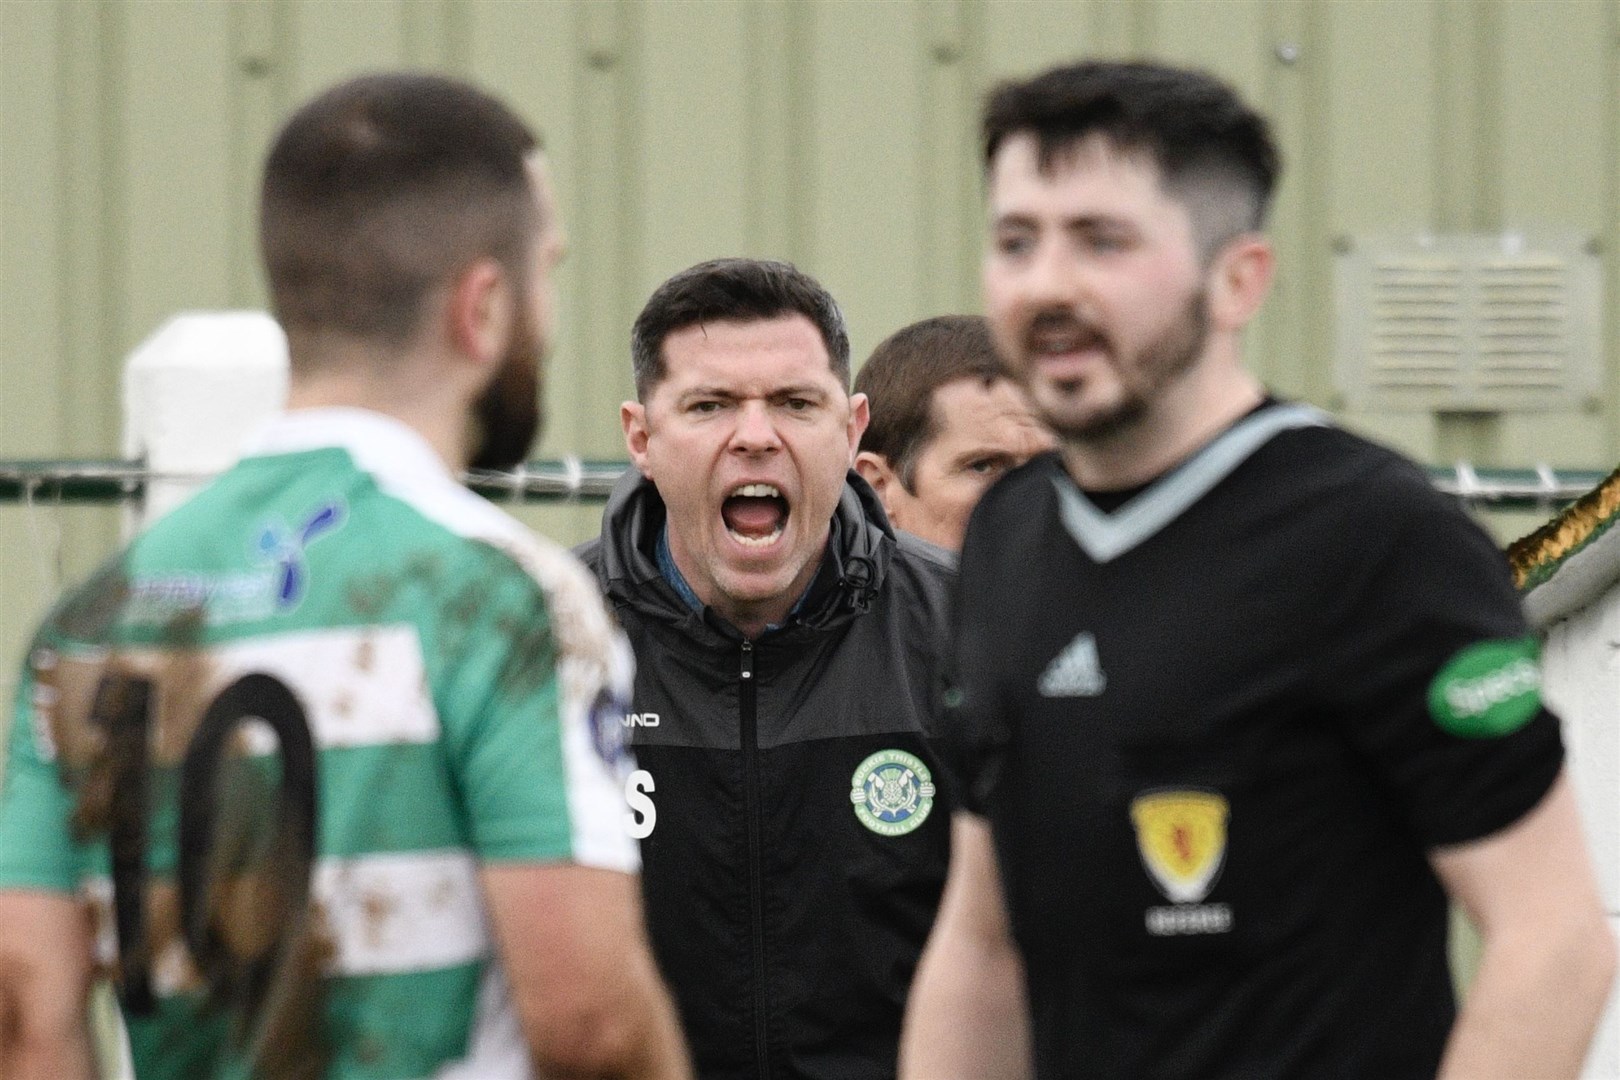 Buckie Thistle boss Graeme Stewart has his say after a foul on Buckie midfielder Andy MacAskill. Picture: Daniel Forsyth